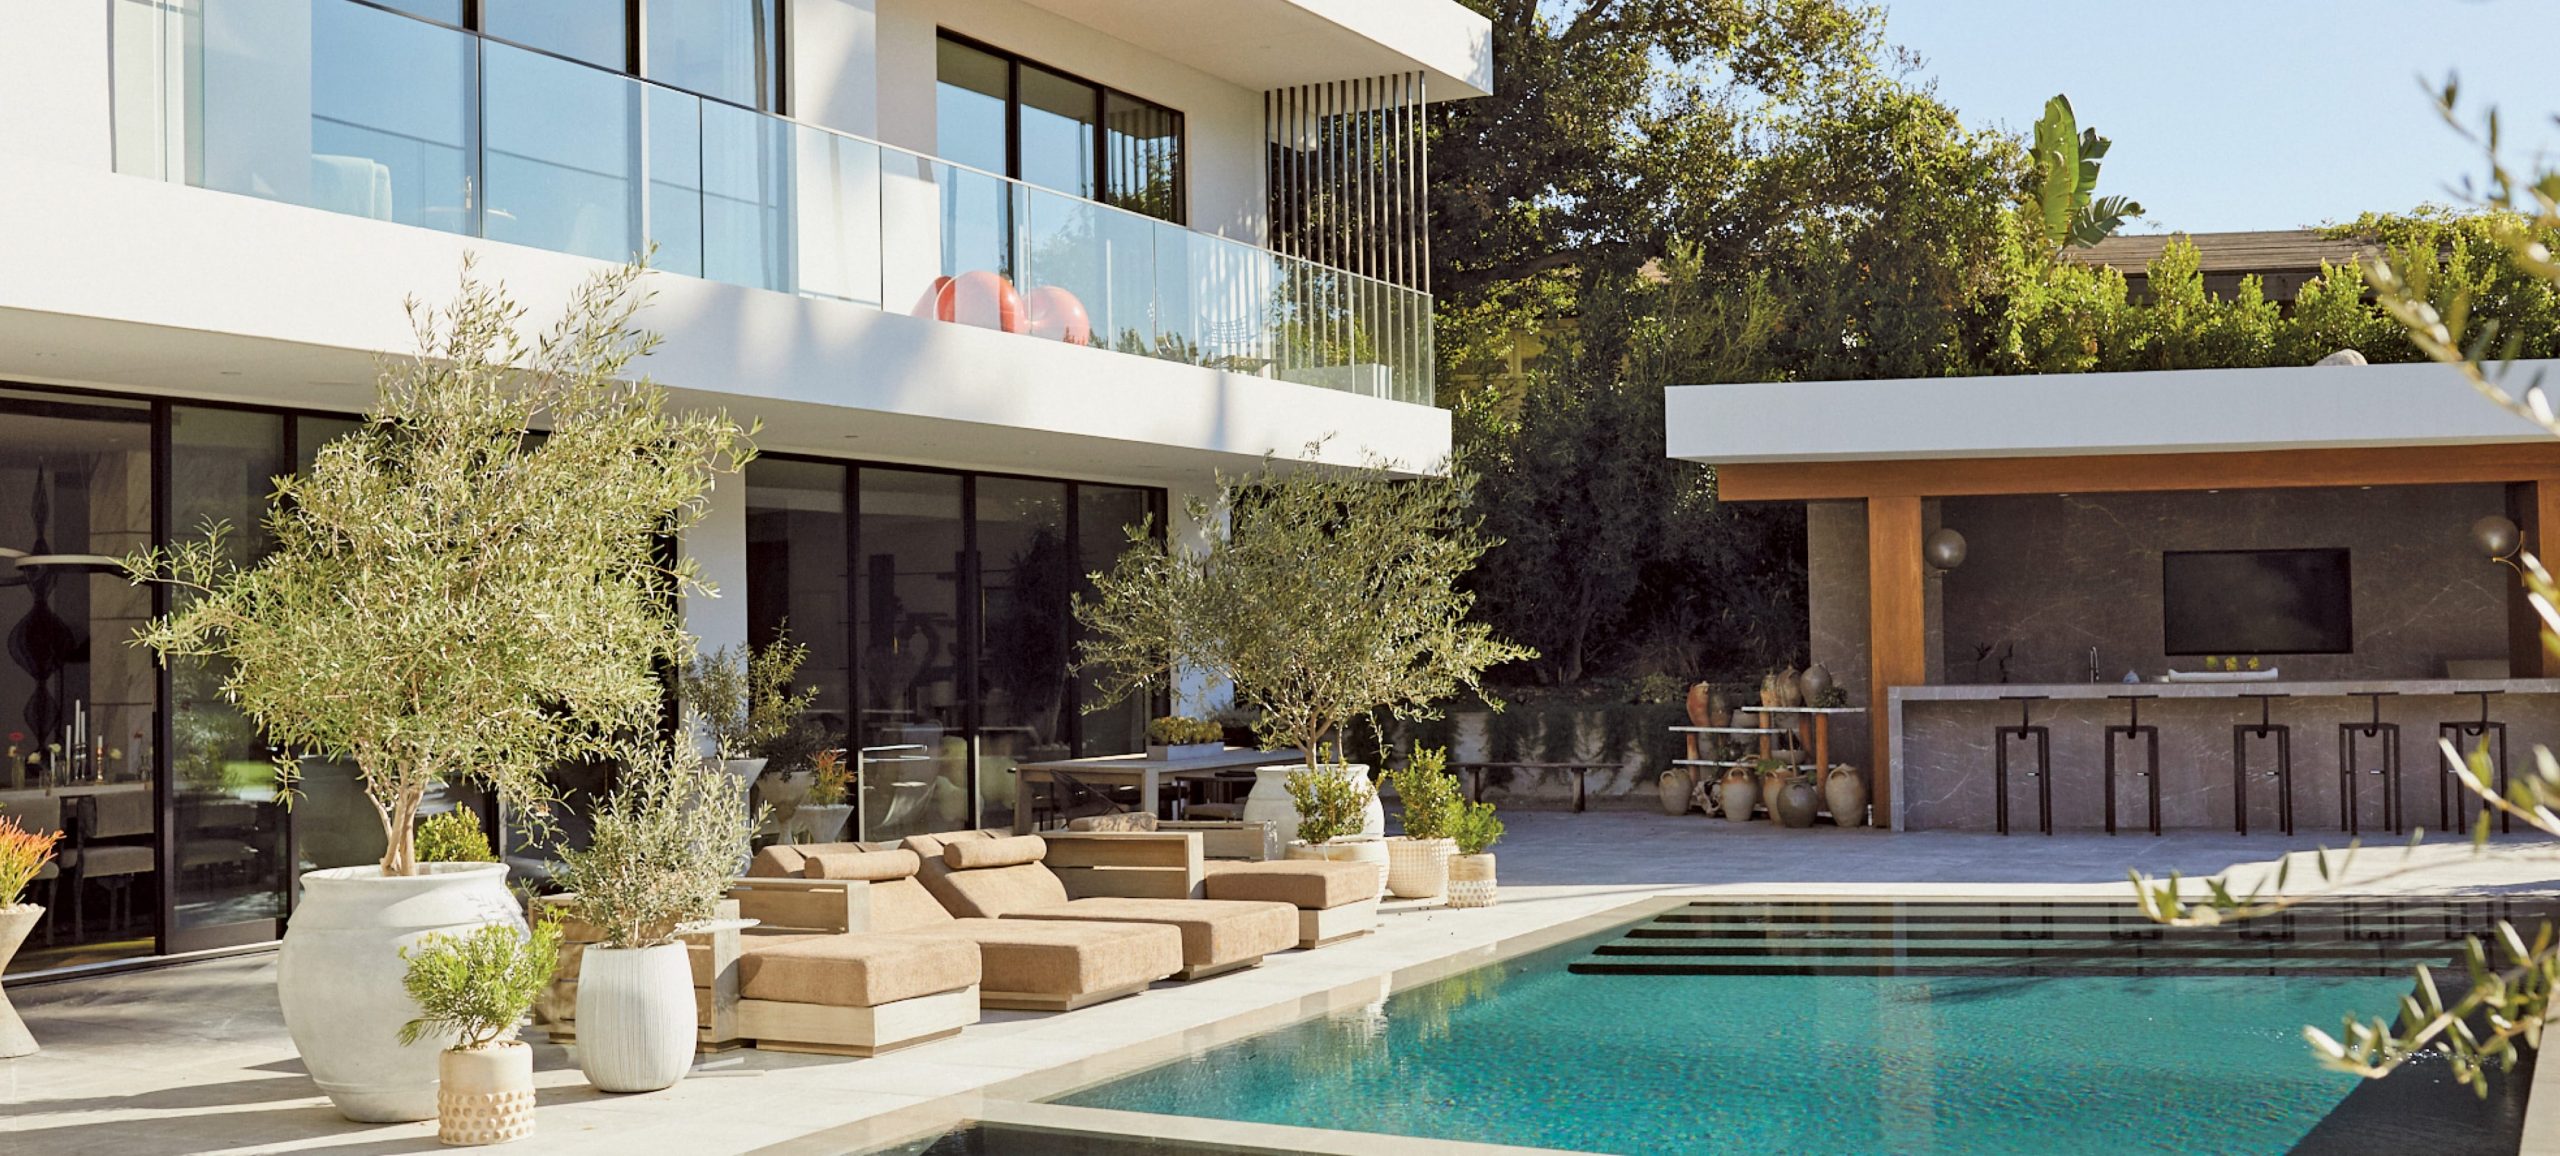 Gaggenau, art of the kitchen, Californian pool and courtyard of mansion of Anastasia Soare